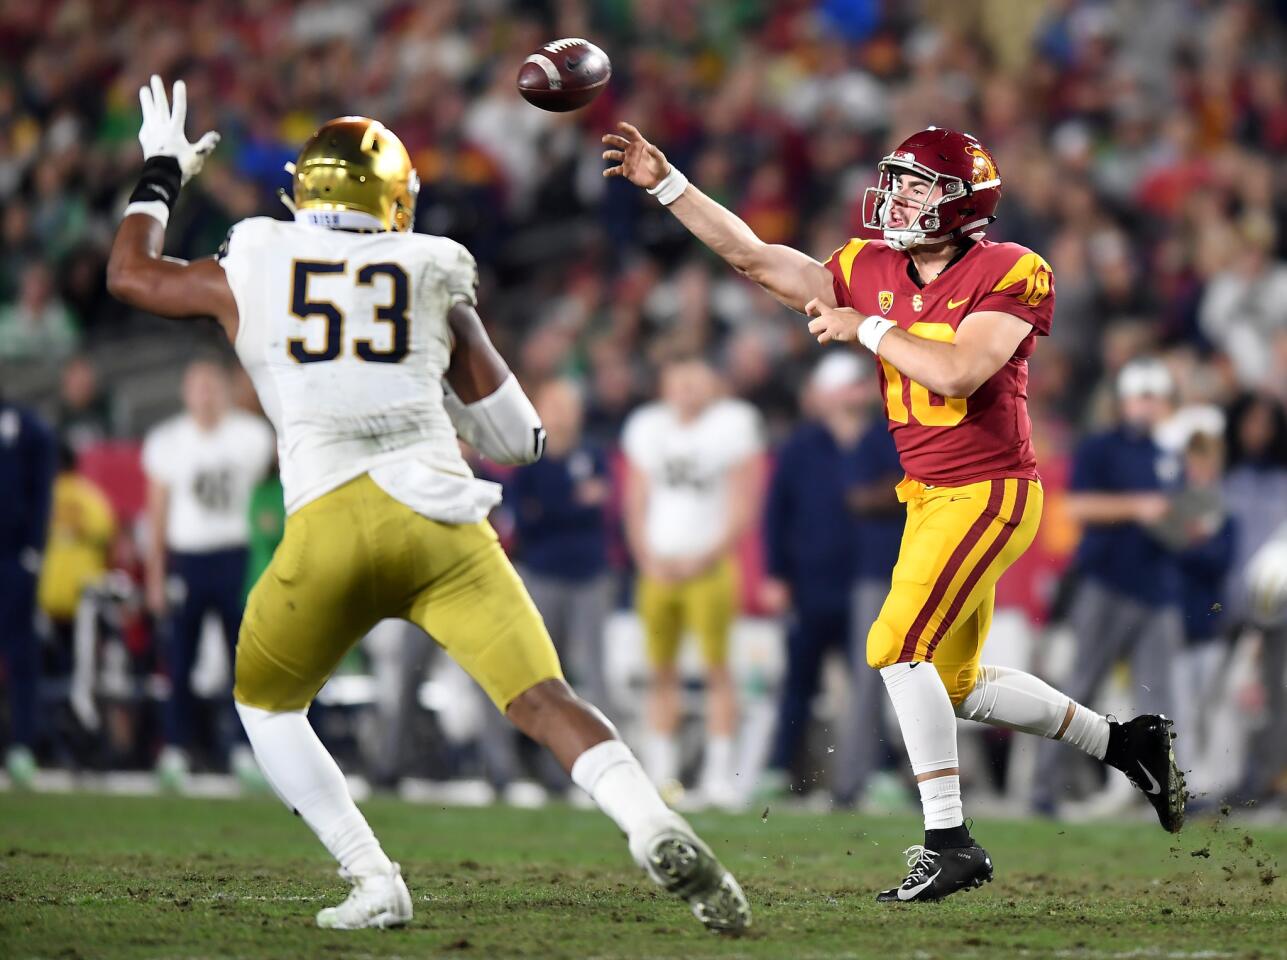 USC quarterback J.T. Daniels gets a pass off in front of Notre Dame's Kahlid Kareem at the Coliseum.